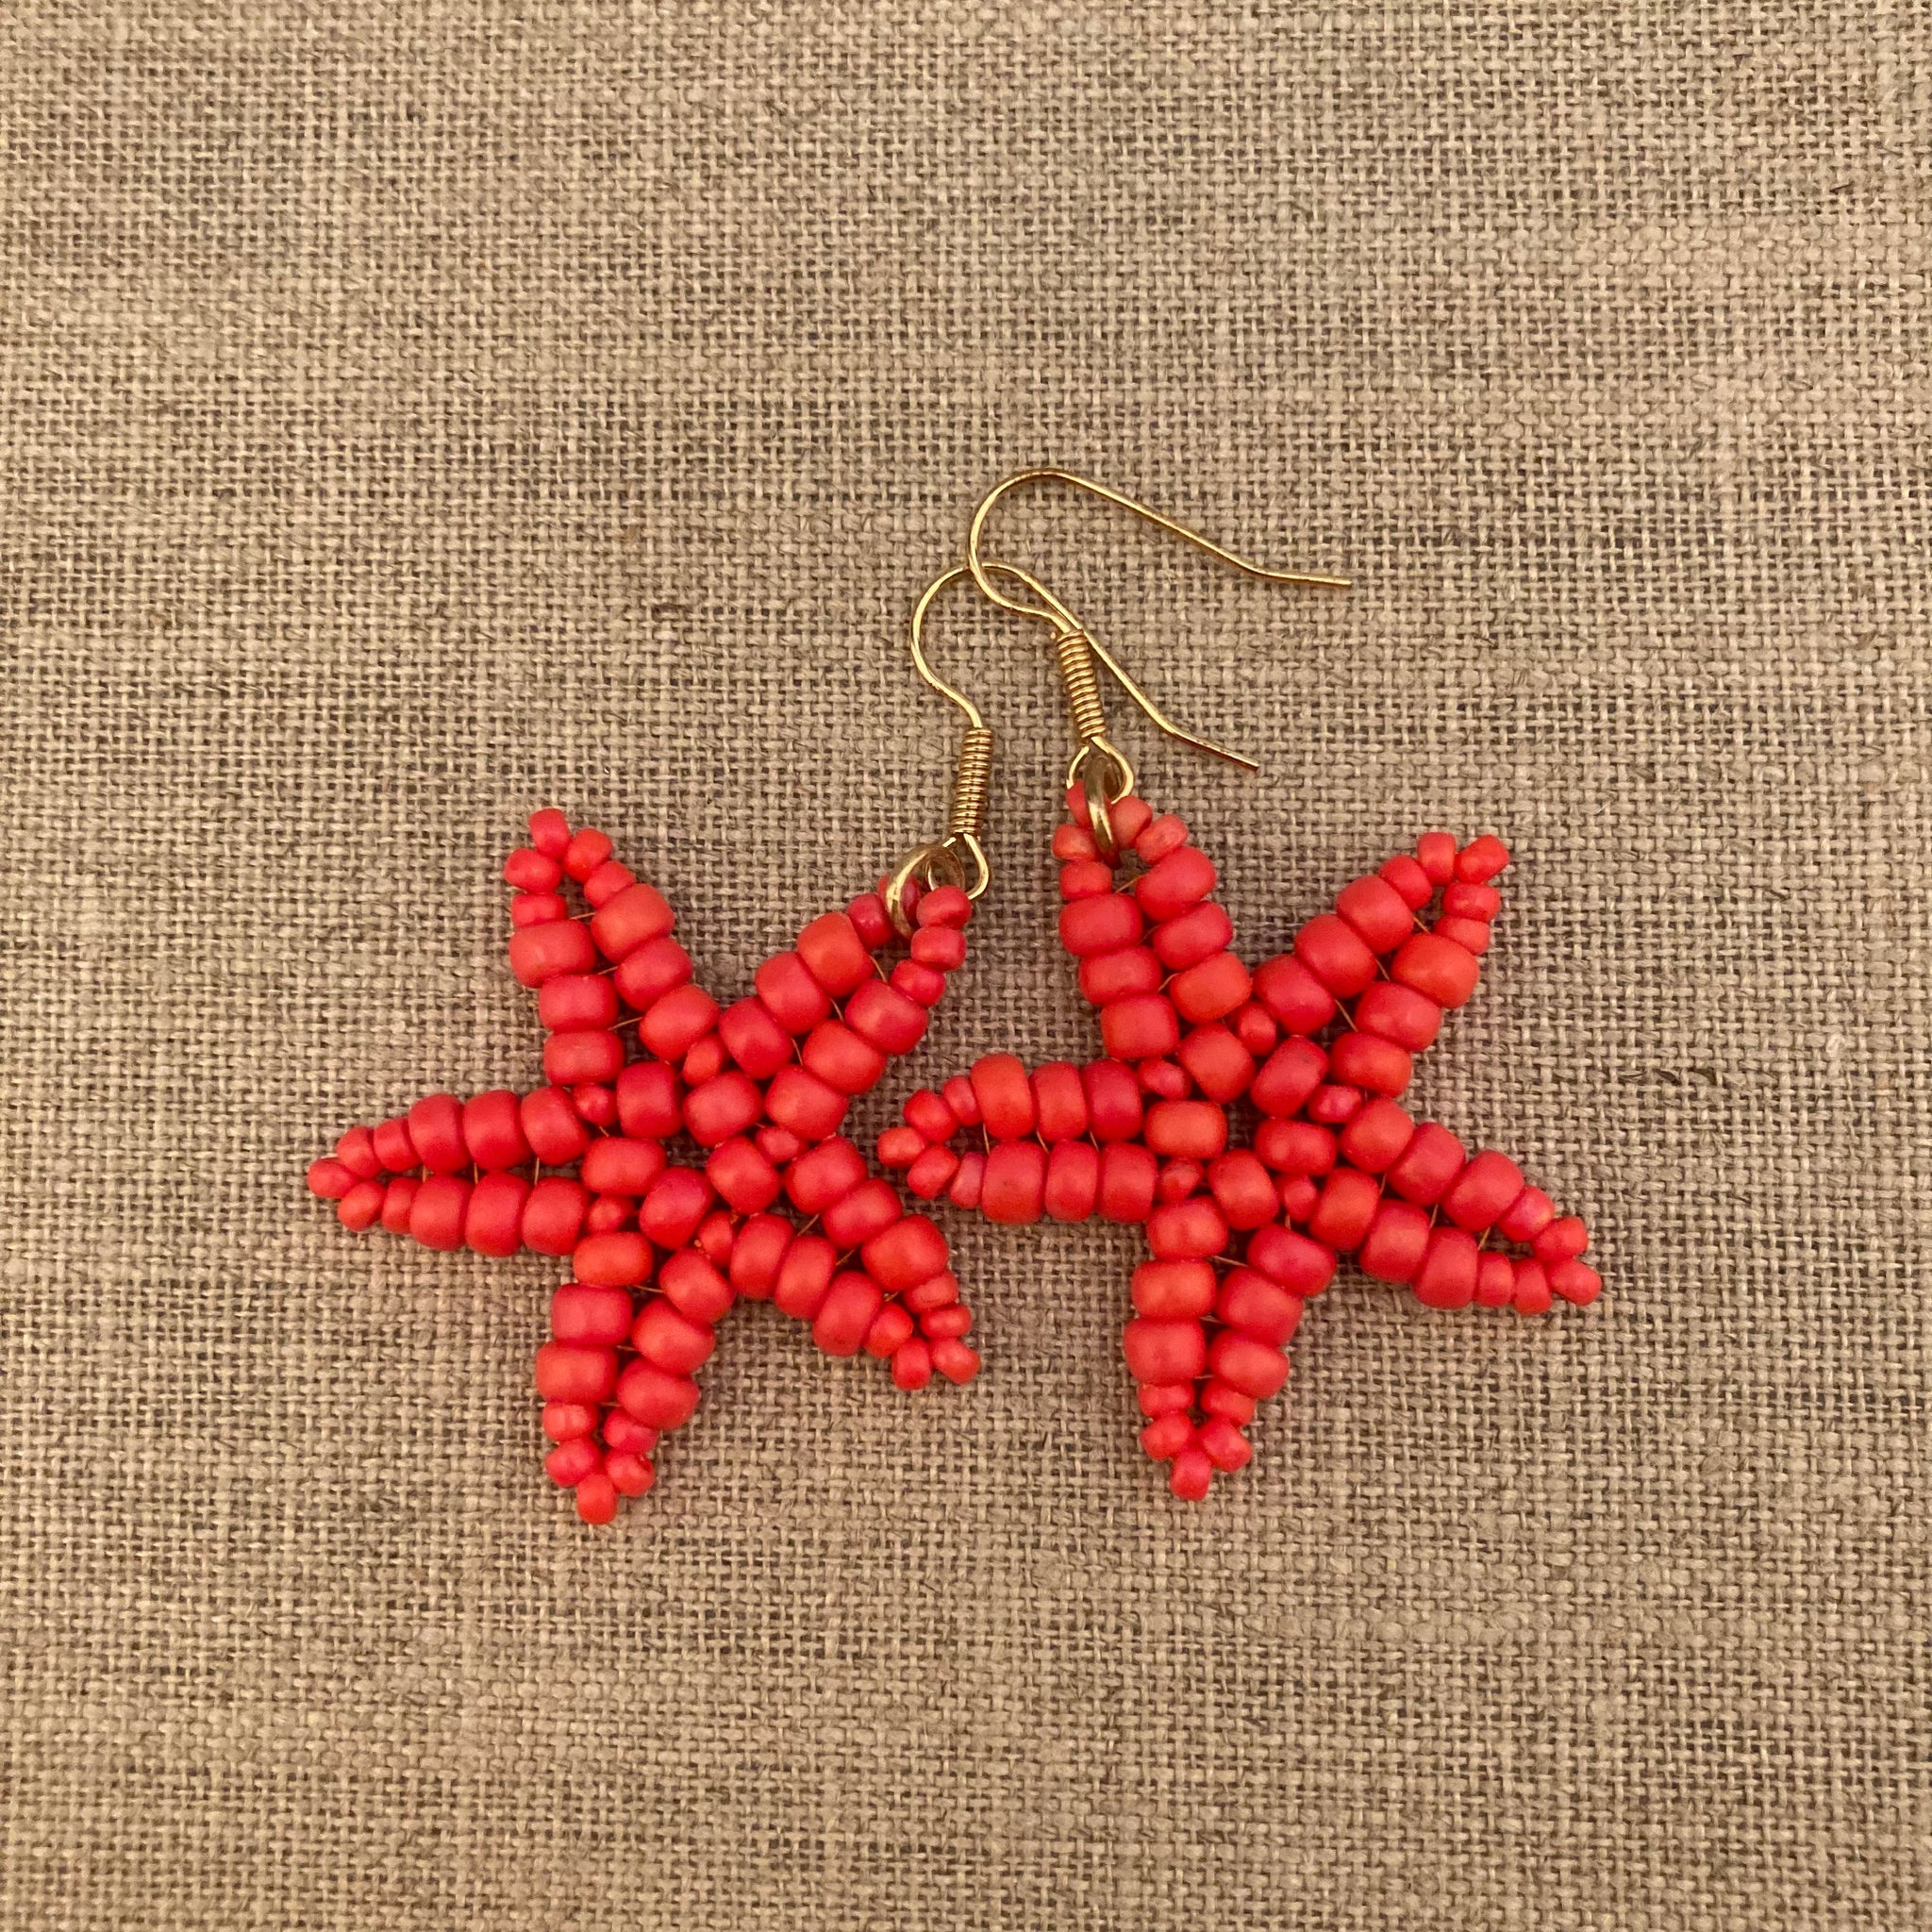 Starfish Earrings available in 17 Vibrant Colors